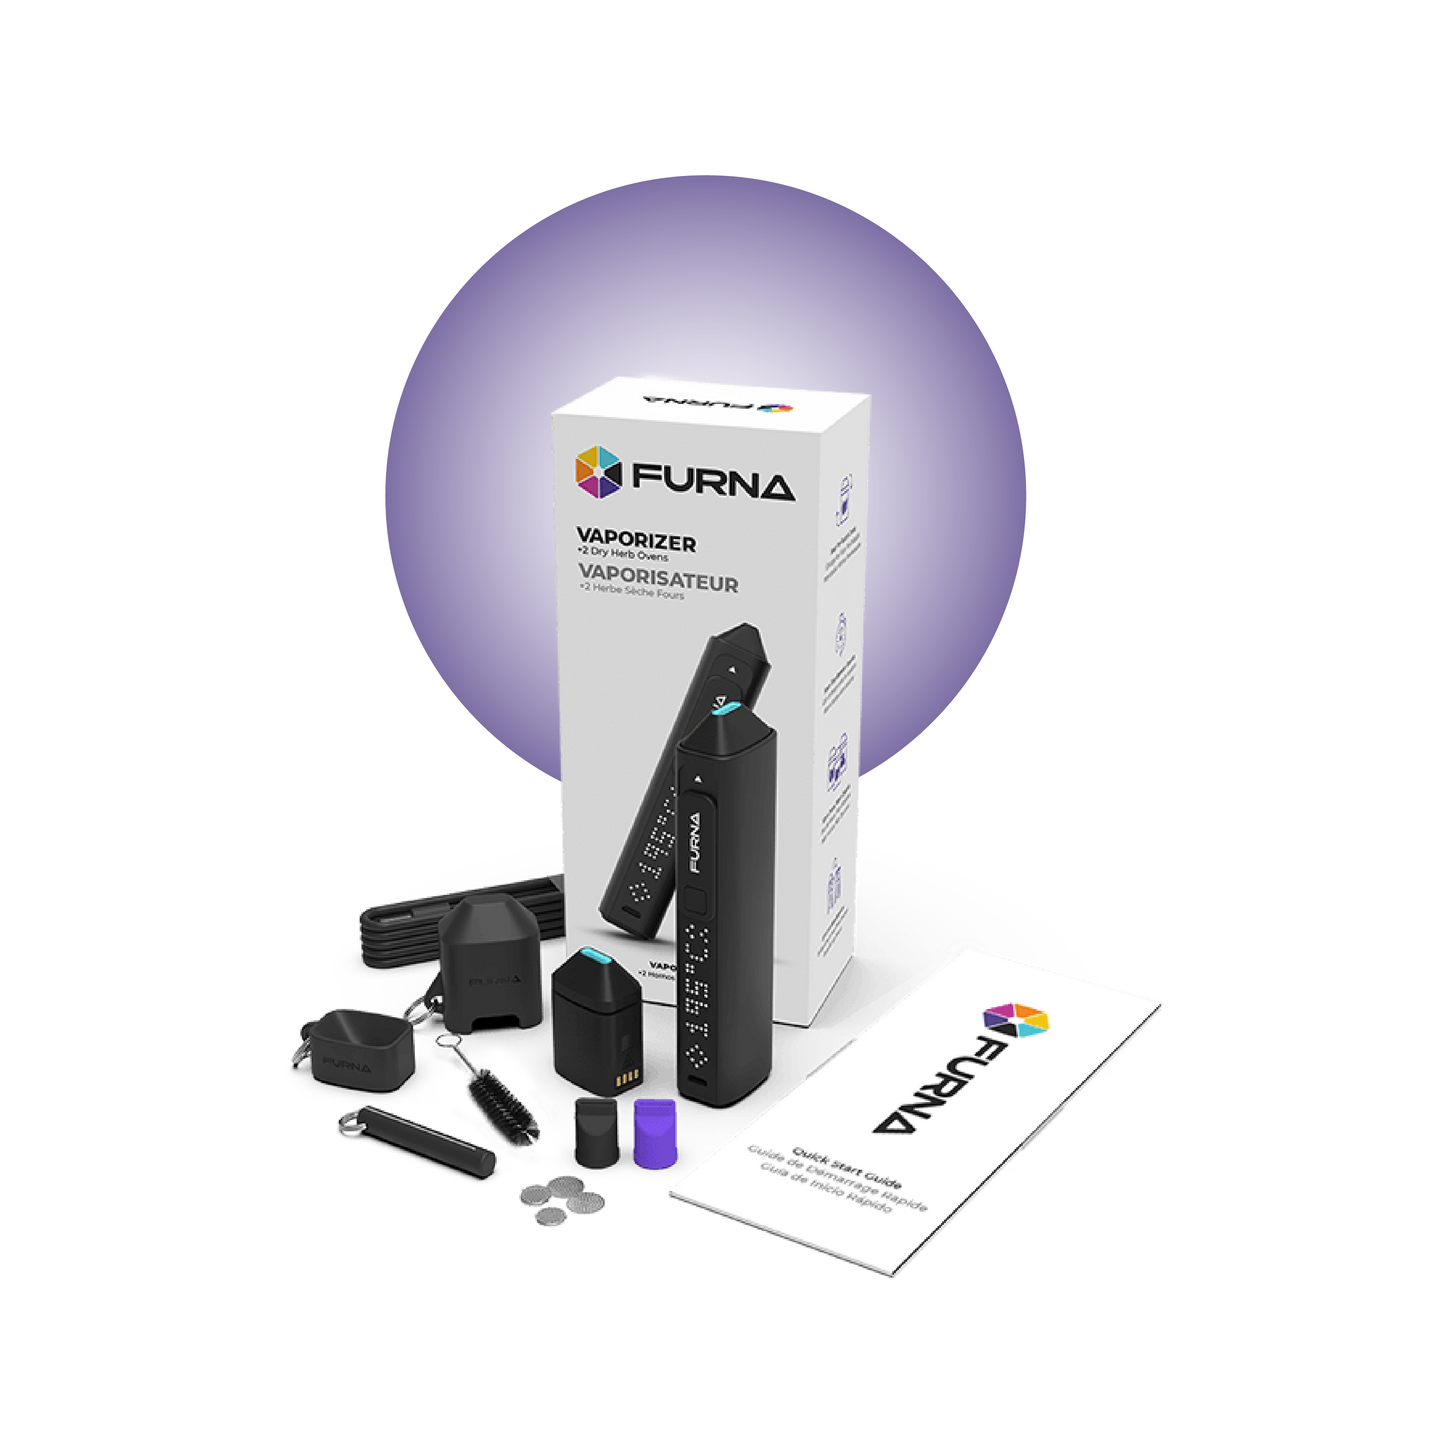 Furna Vaporizer Complete Kit with 2 Dry Herb Ovens price